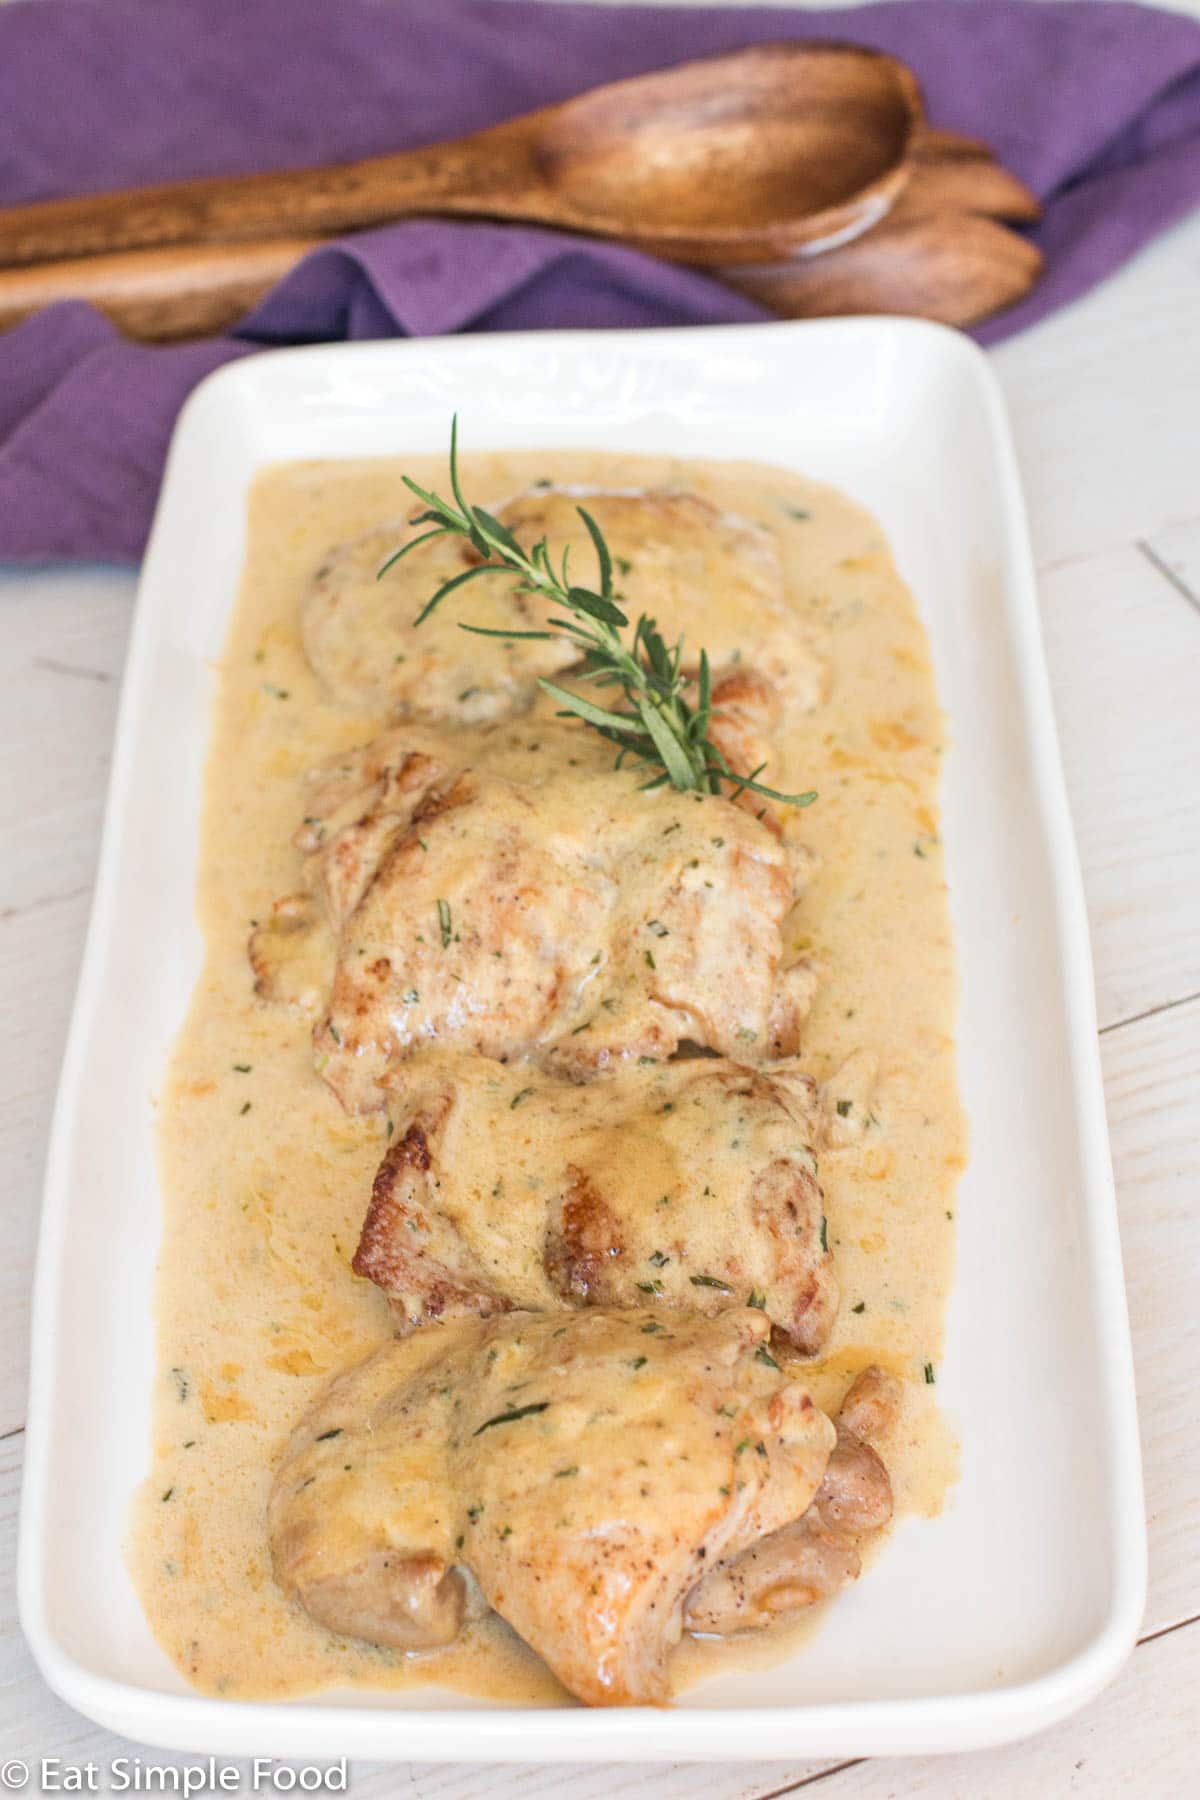 Side view of seared boneless chicken thighs on a white plate with a yellow mustard cream sauce with a sprig of fresh rosemary.